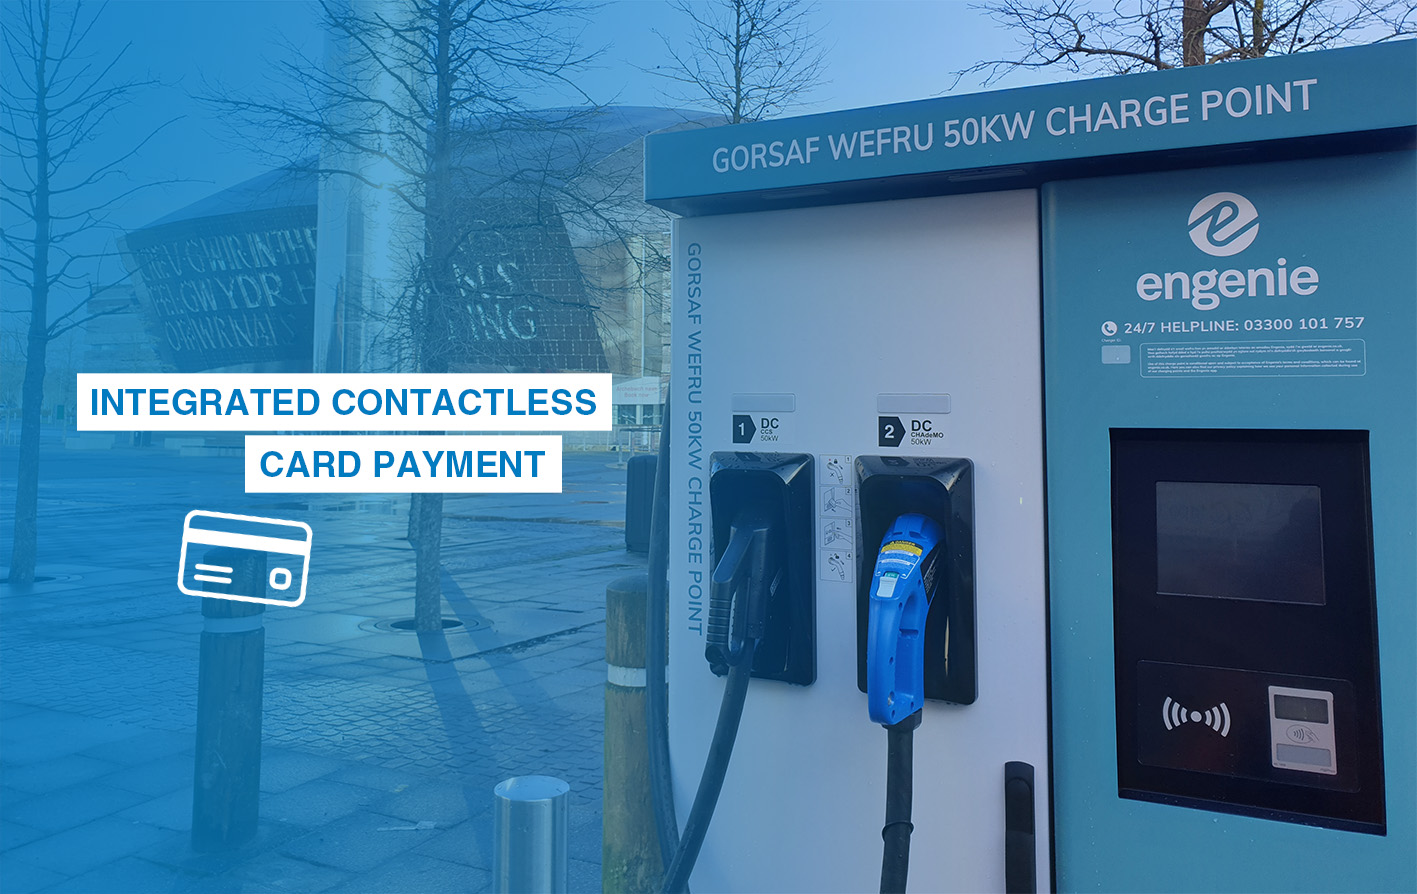 With contactless payment available, EV drivers no longer need to use an app or register to pay for charging.